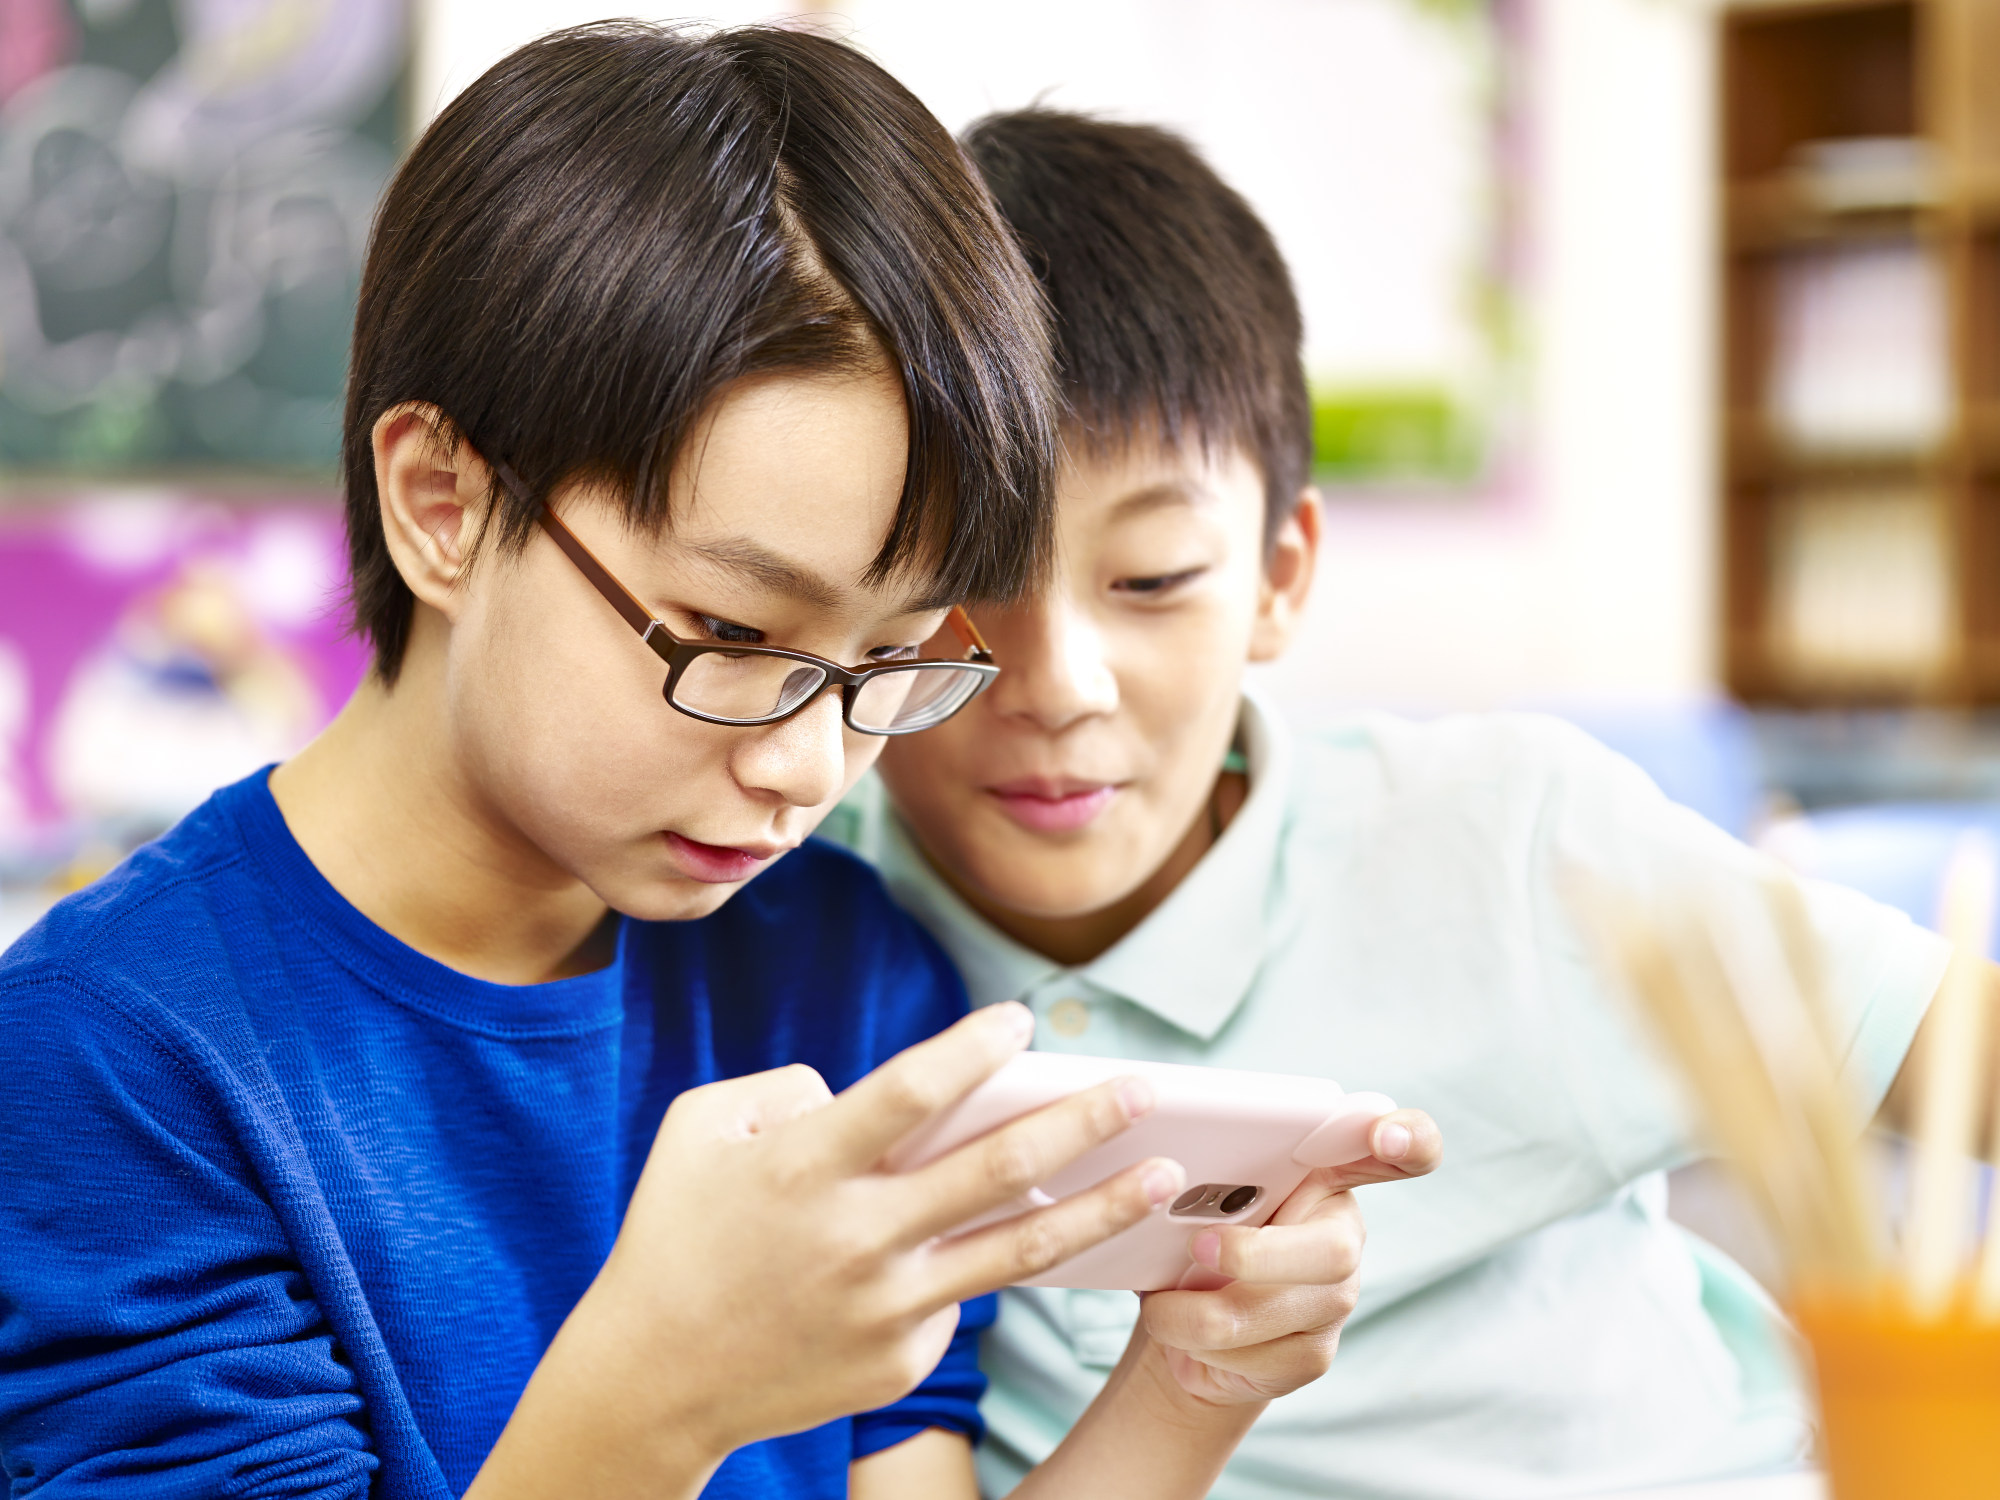 Game addiction among children is an increasingly common social problem in China while authorities have been trying to encourage other physical activities through schools in recent years. Photo: Shutterstock